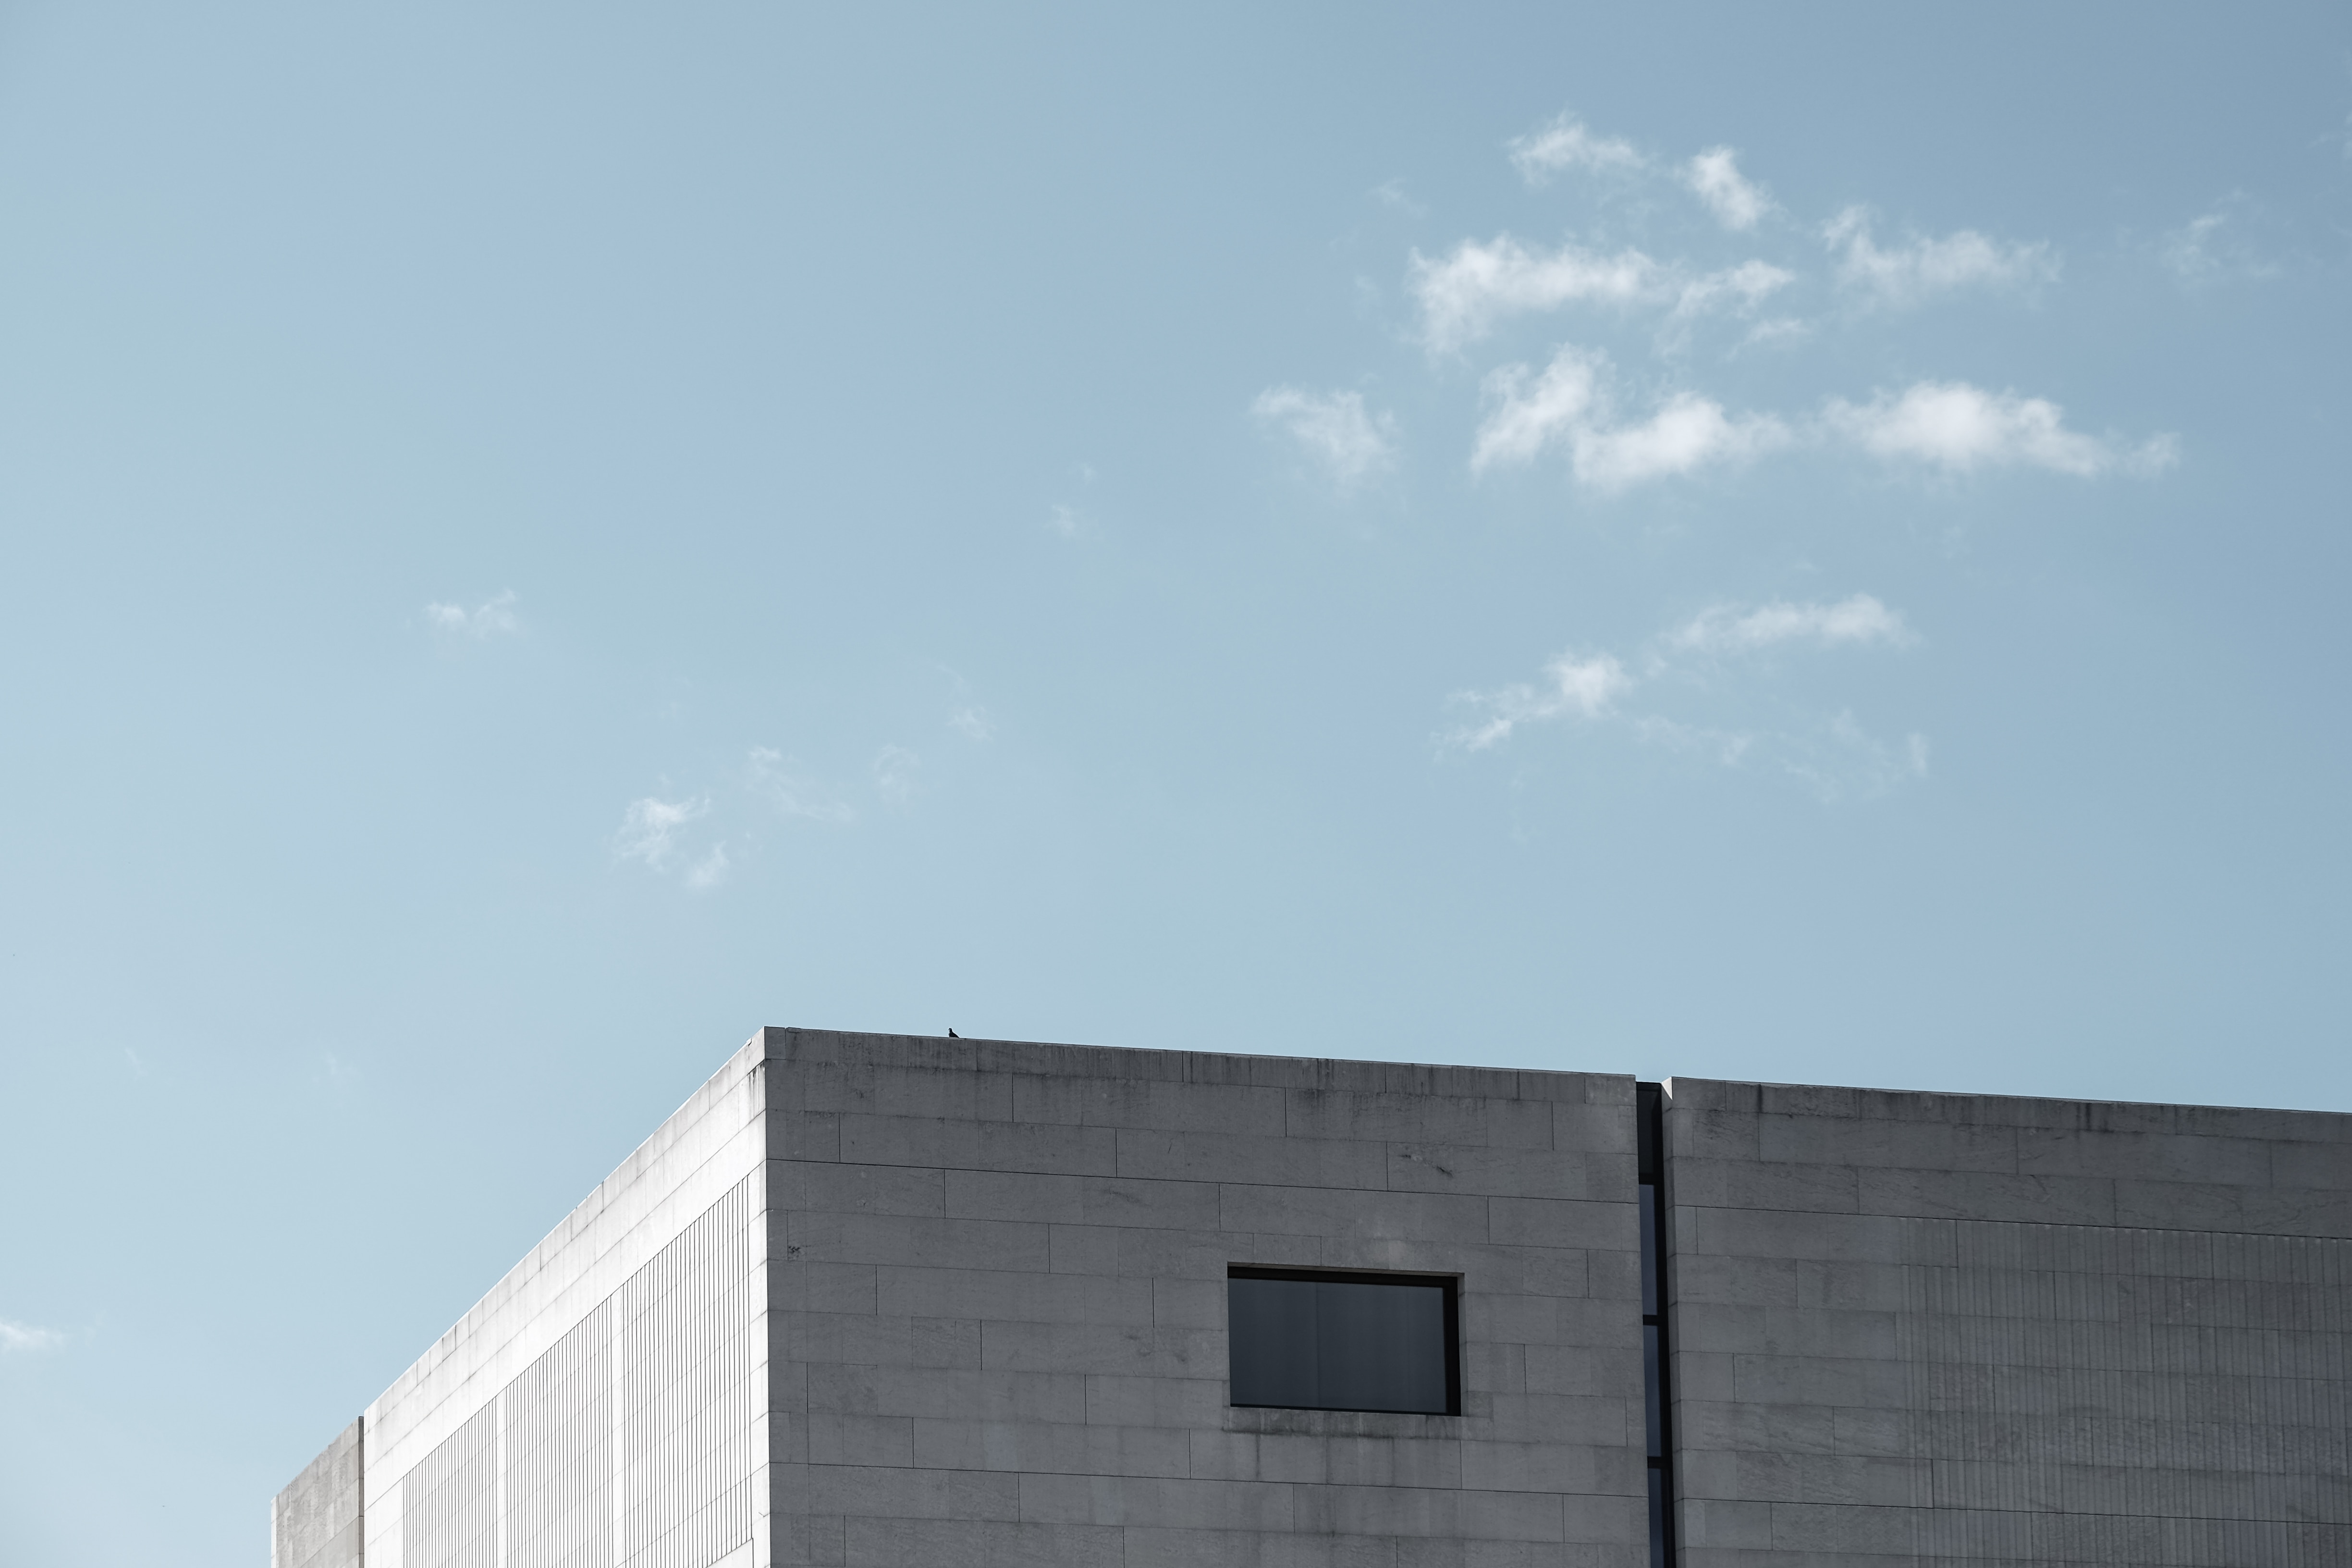 2560x1440 Wallpaper Gray Concrete Building And Sky Peakpx